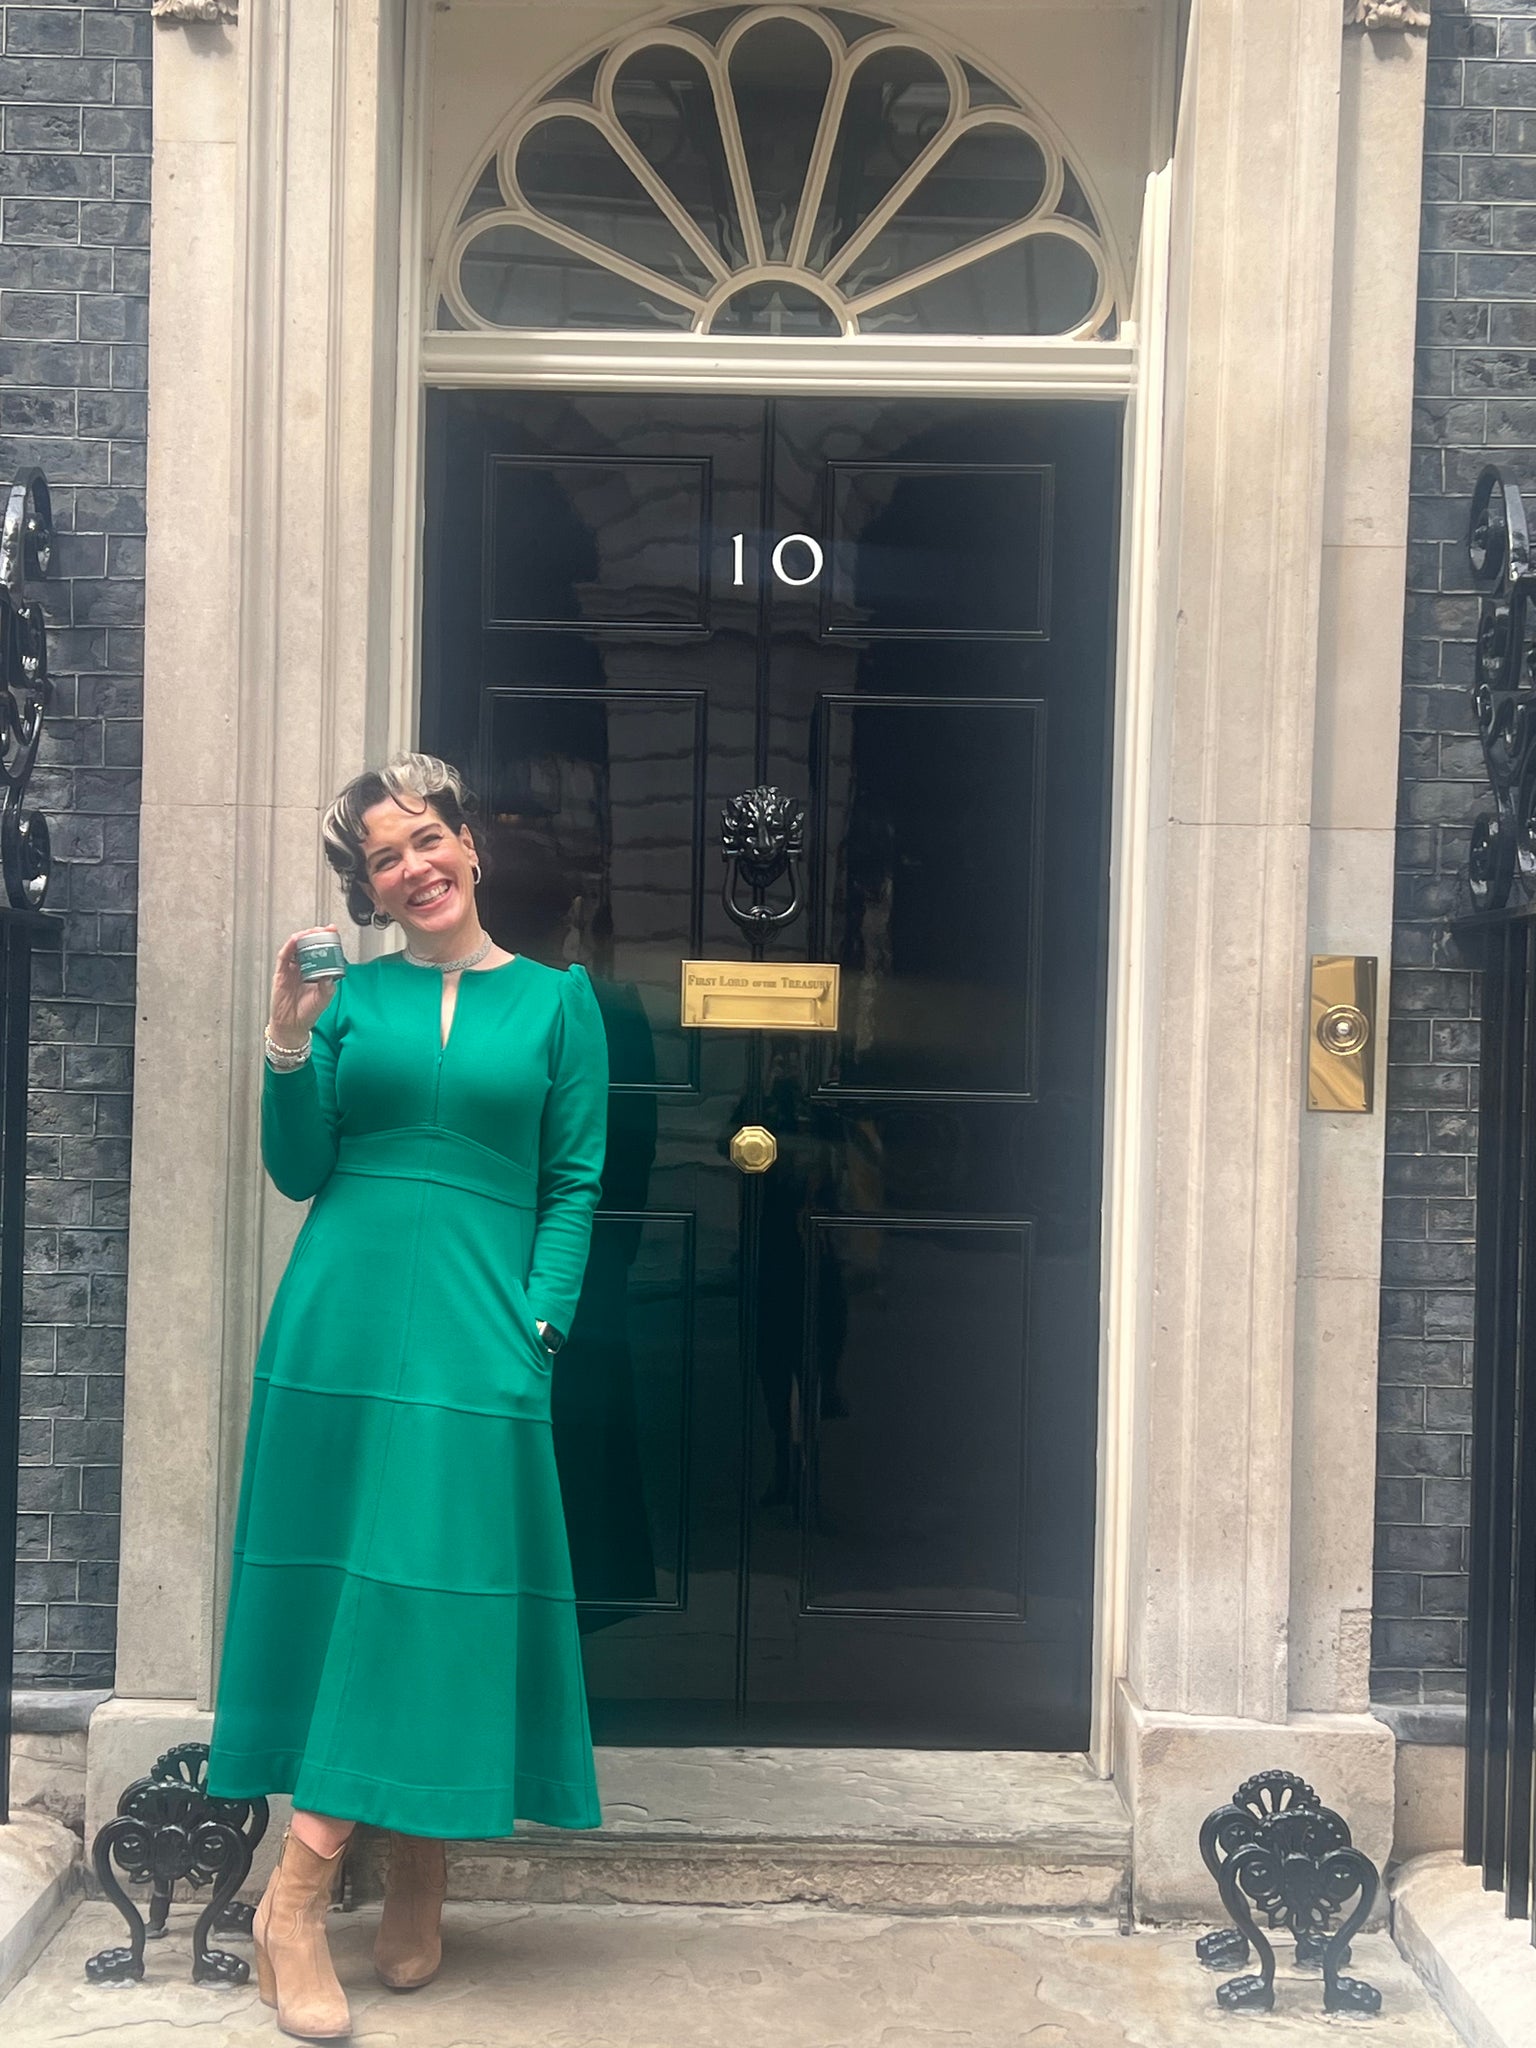 OMGTea founder Katherine Swift in front of 10 Downing Street